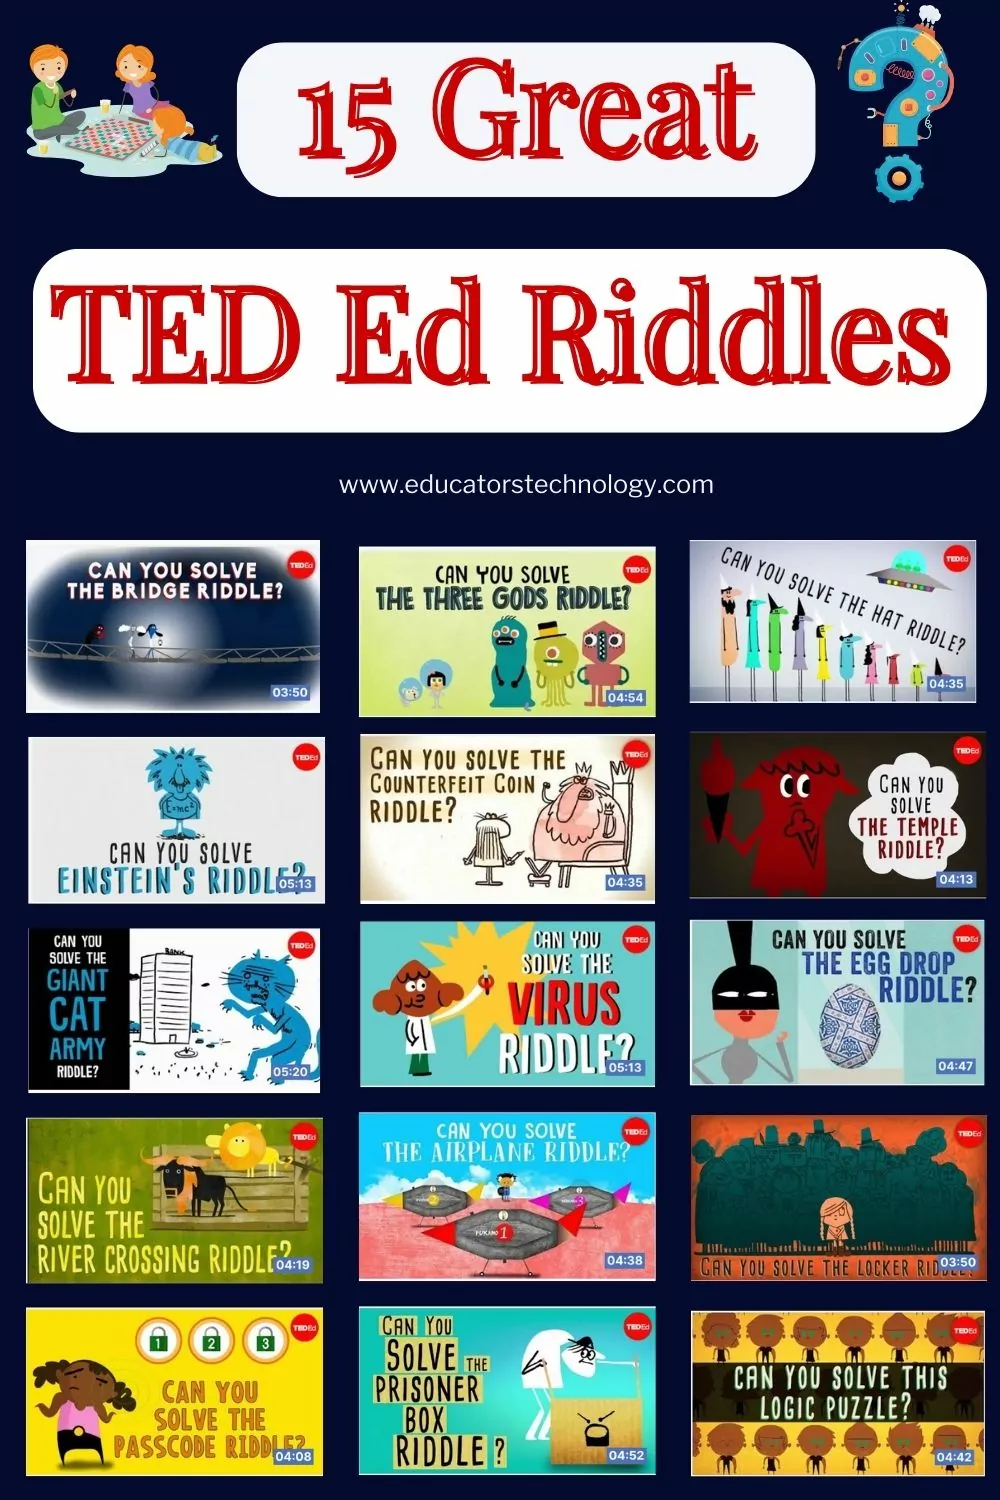 20 Hard Riddles for Adults: Best Brain Teasers for Adults